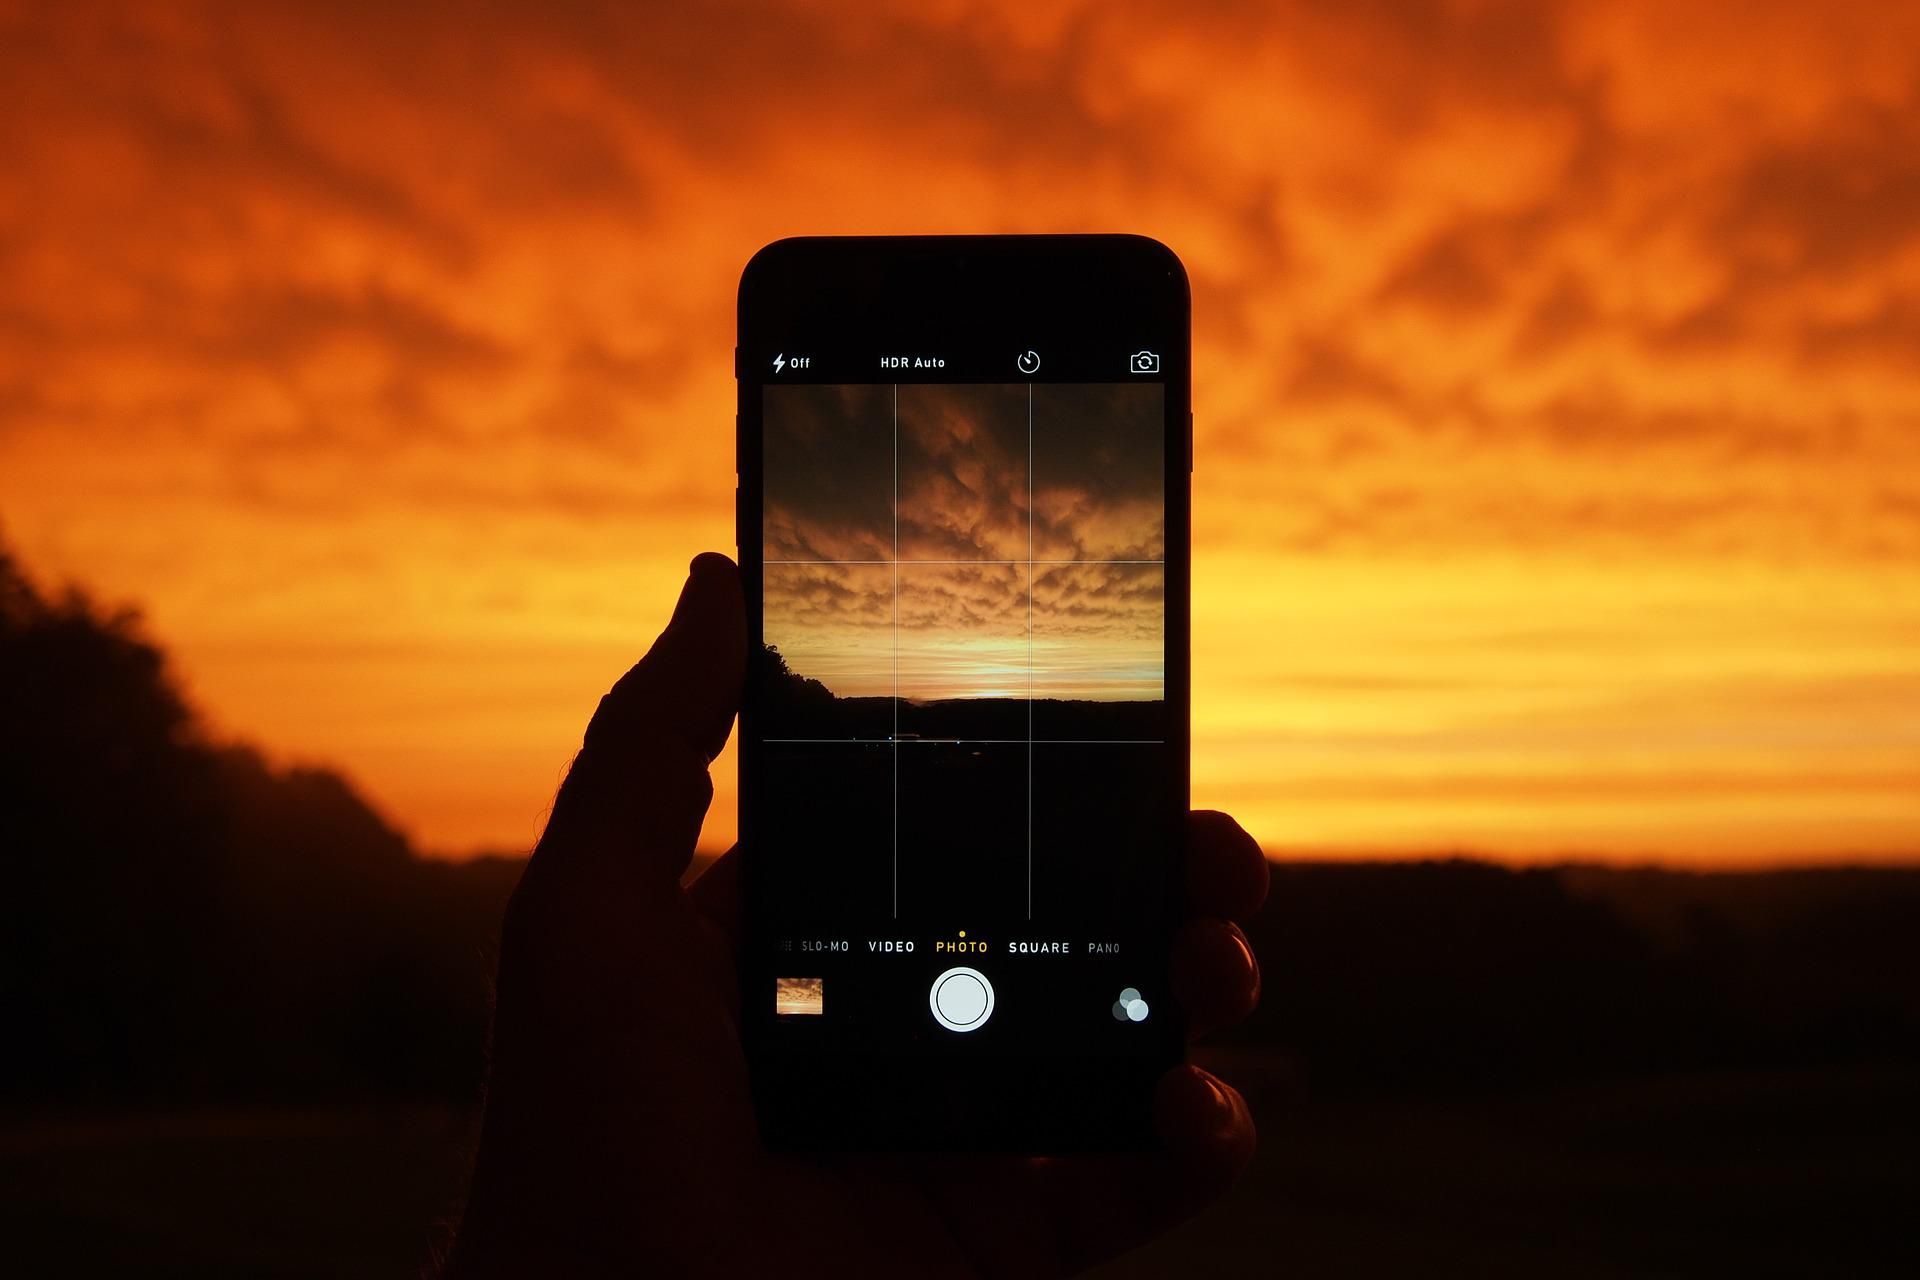 Phone camera with grid showing a sunset scene